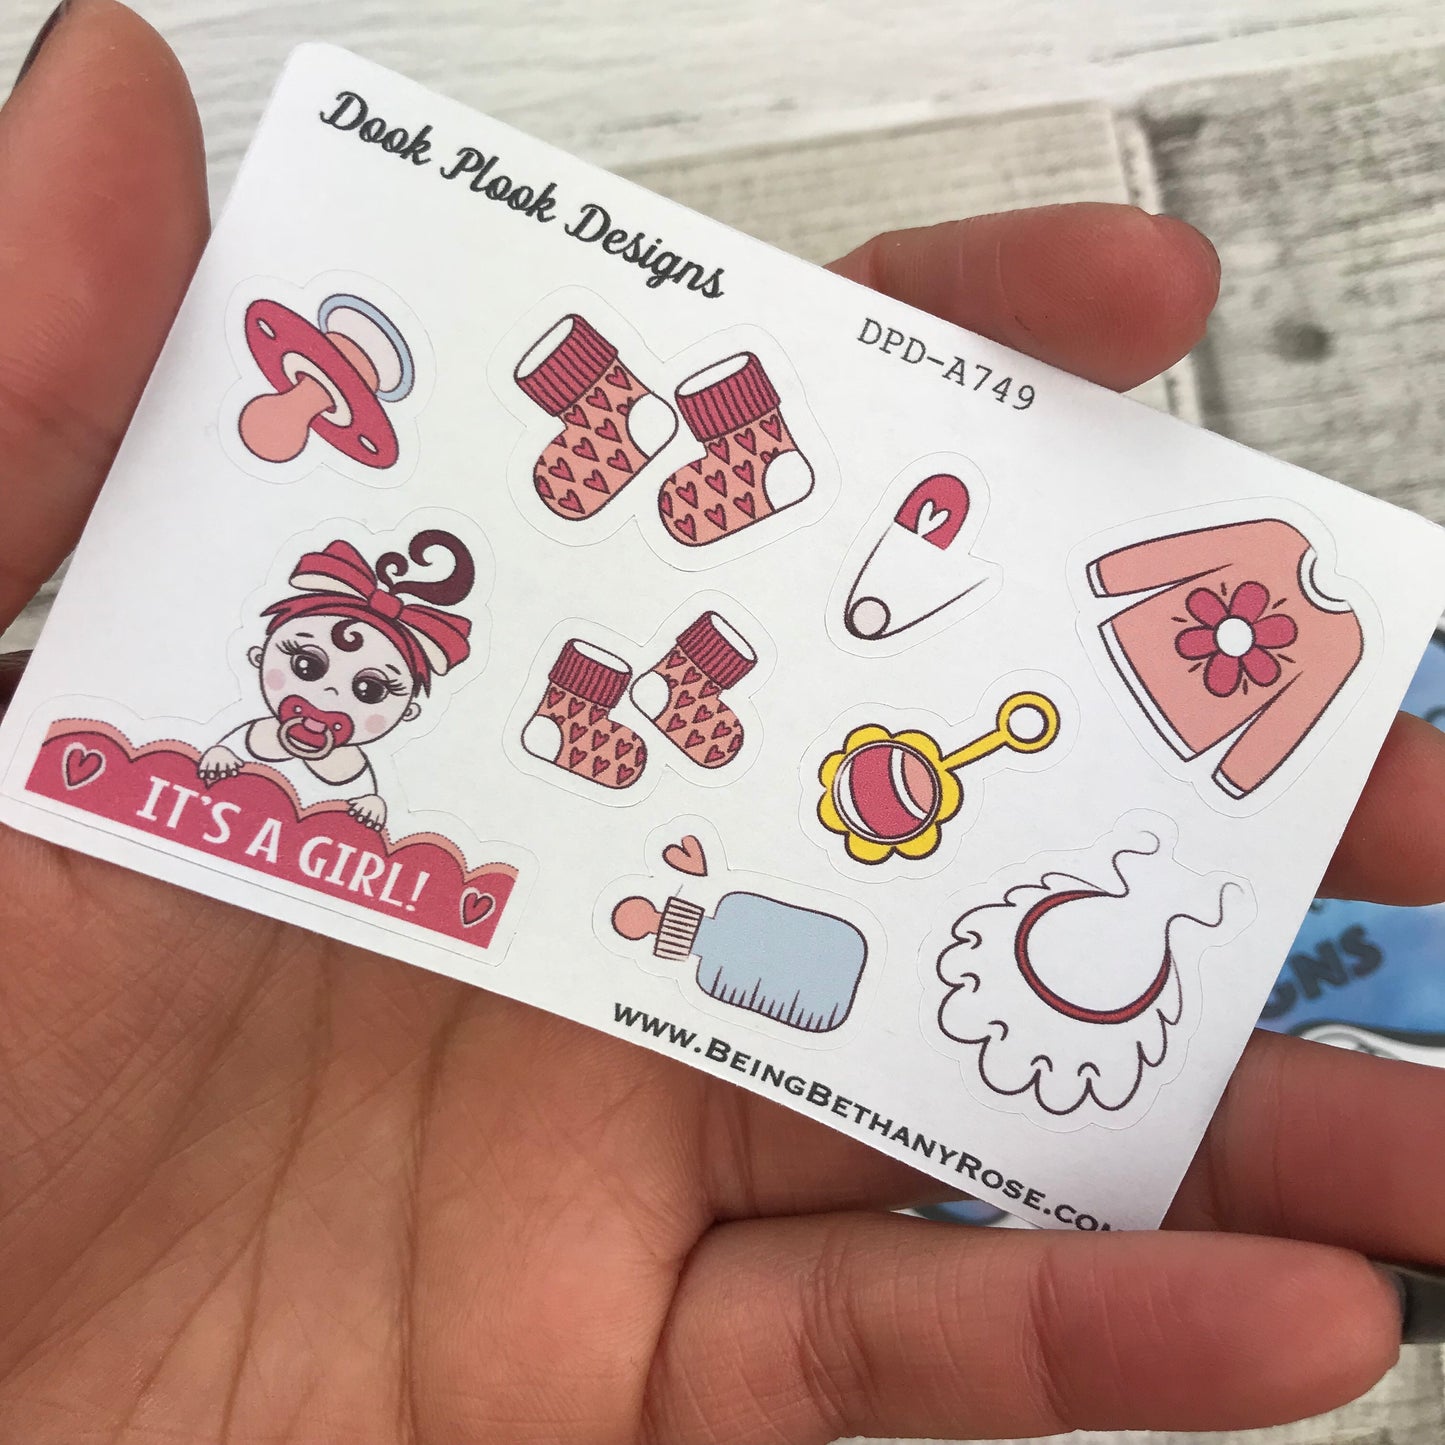 Its A Girl stickers (Small Sampler Size) A749